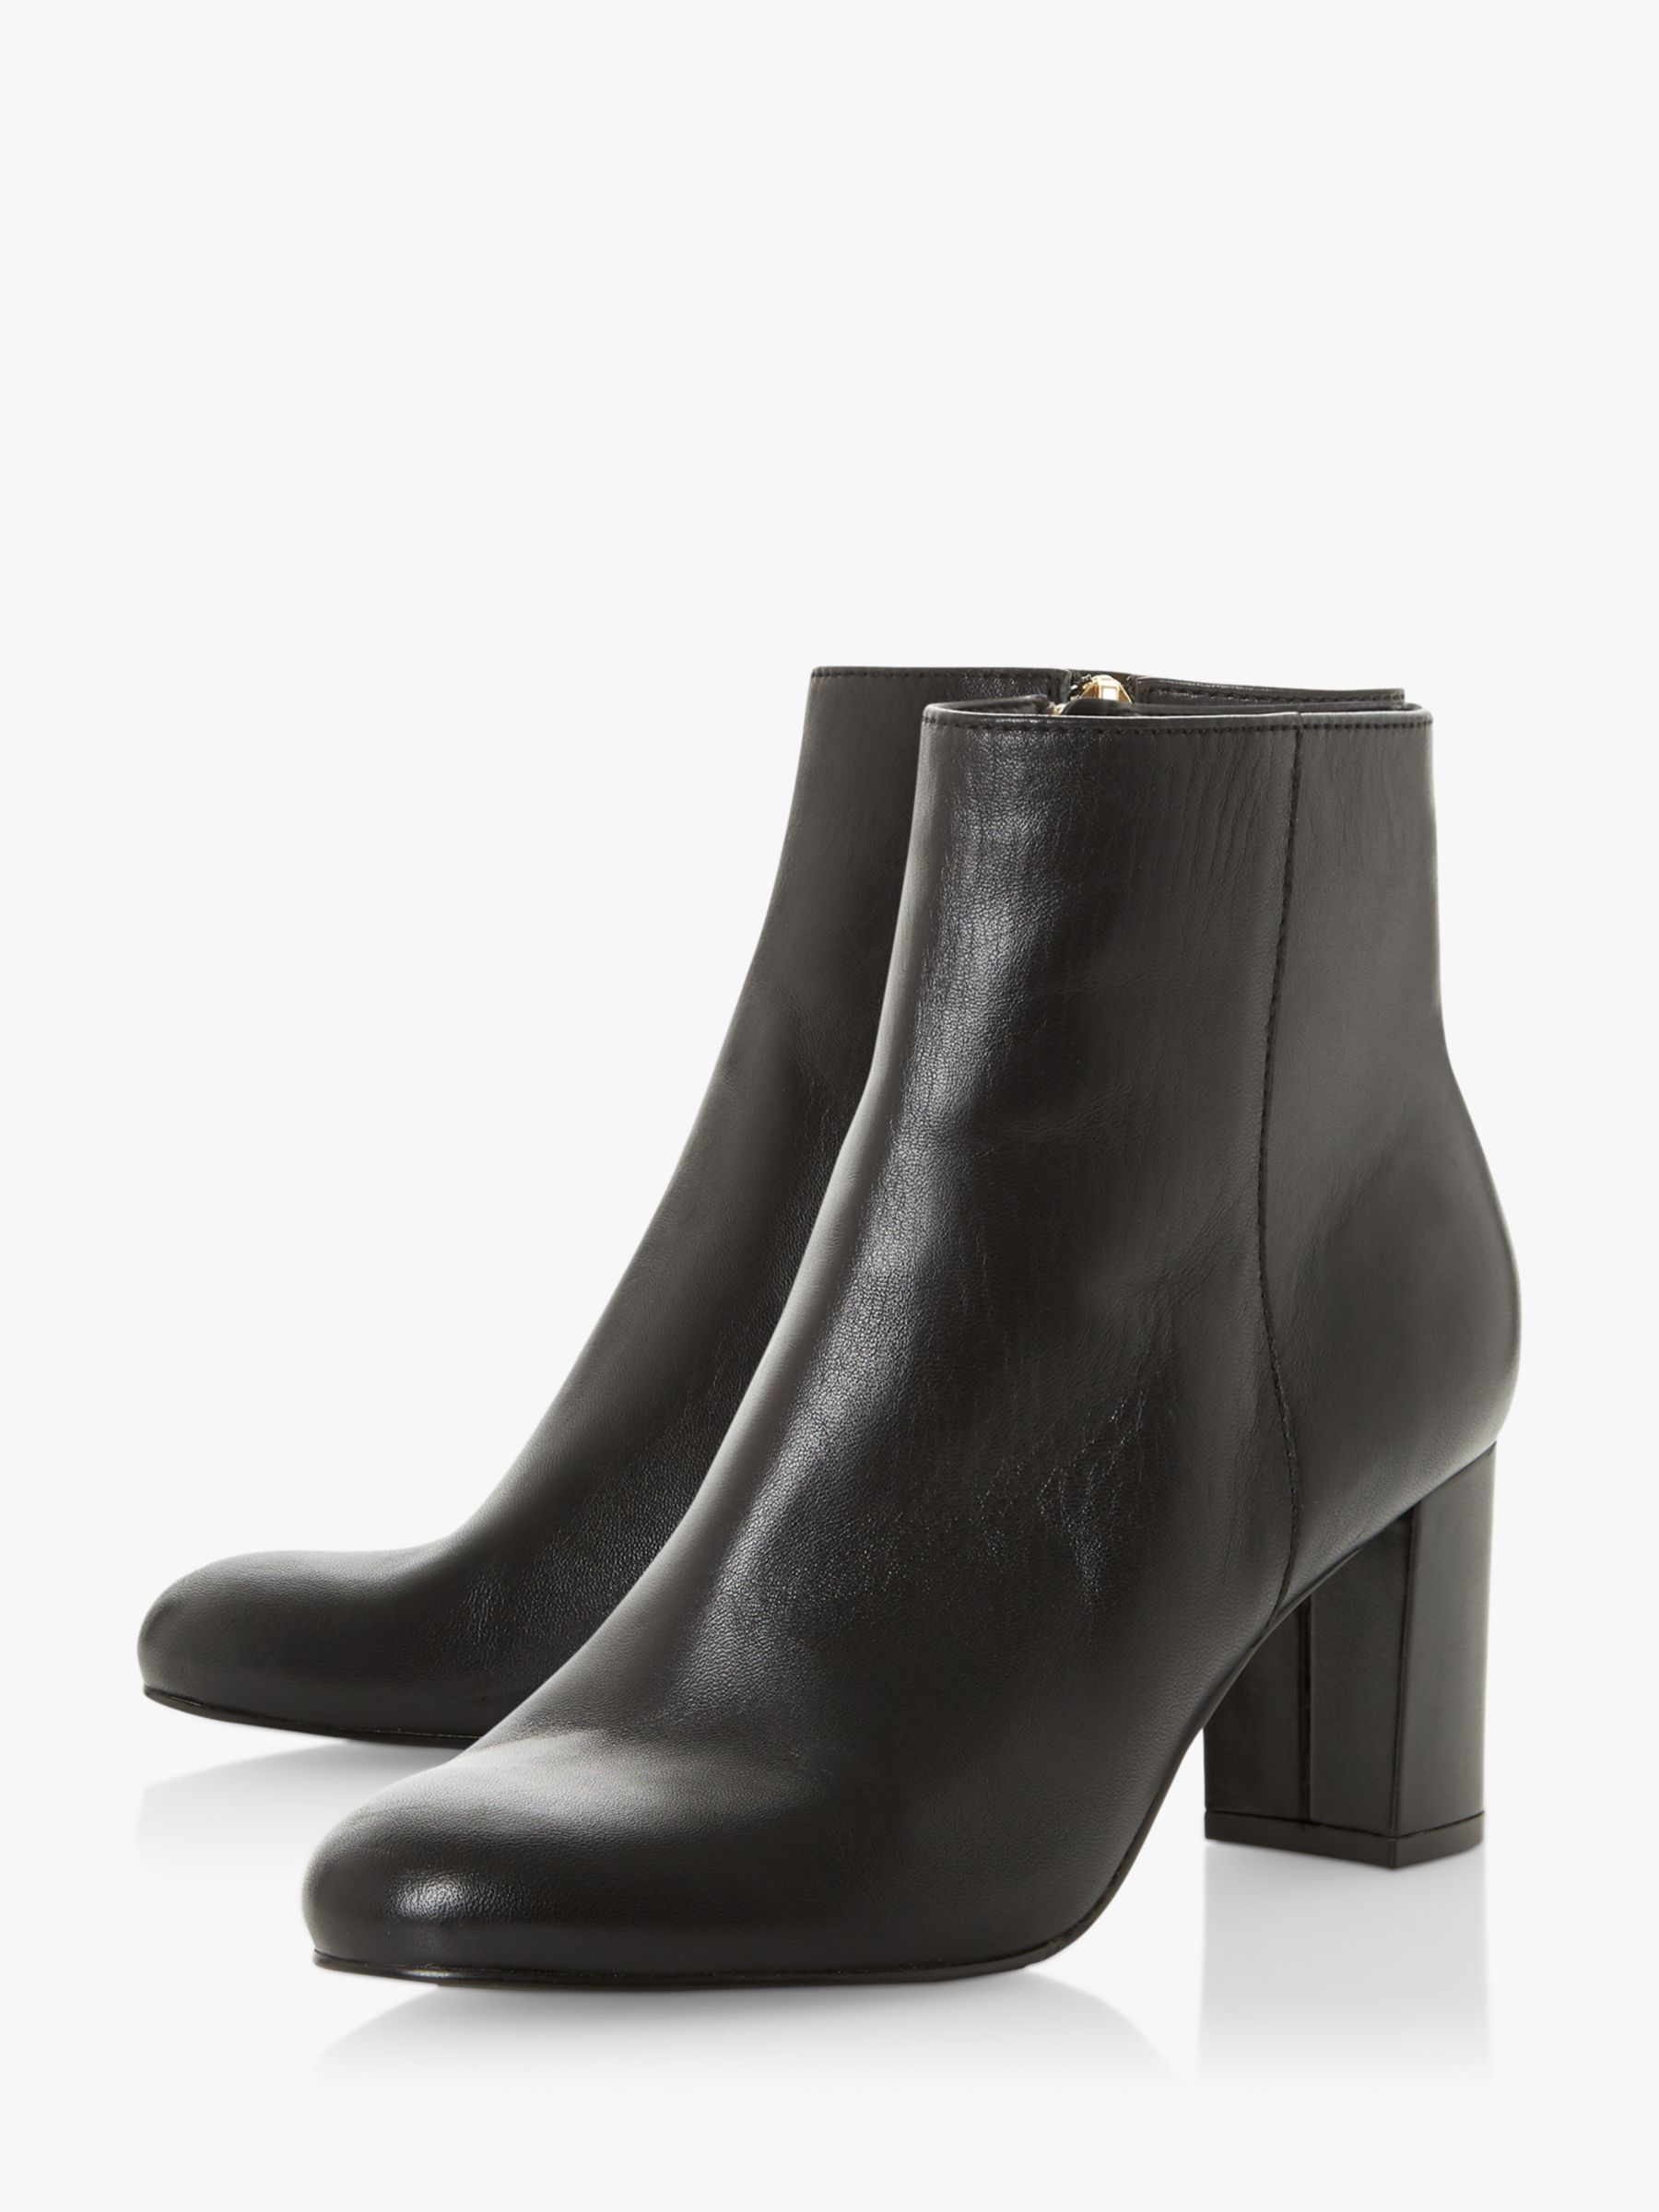 Dune Ovel T Leather Block Heel Ankle Boots, Black